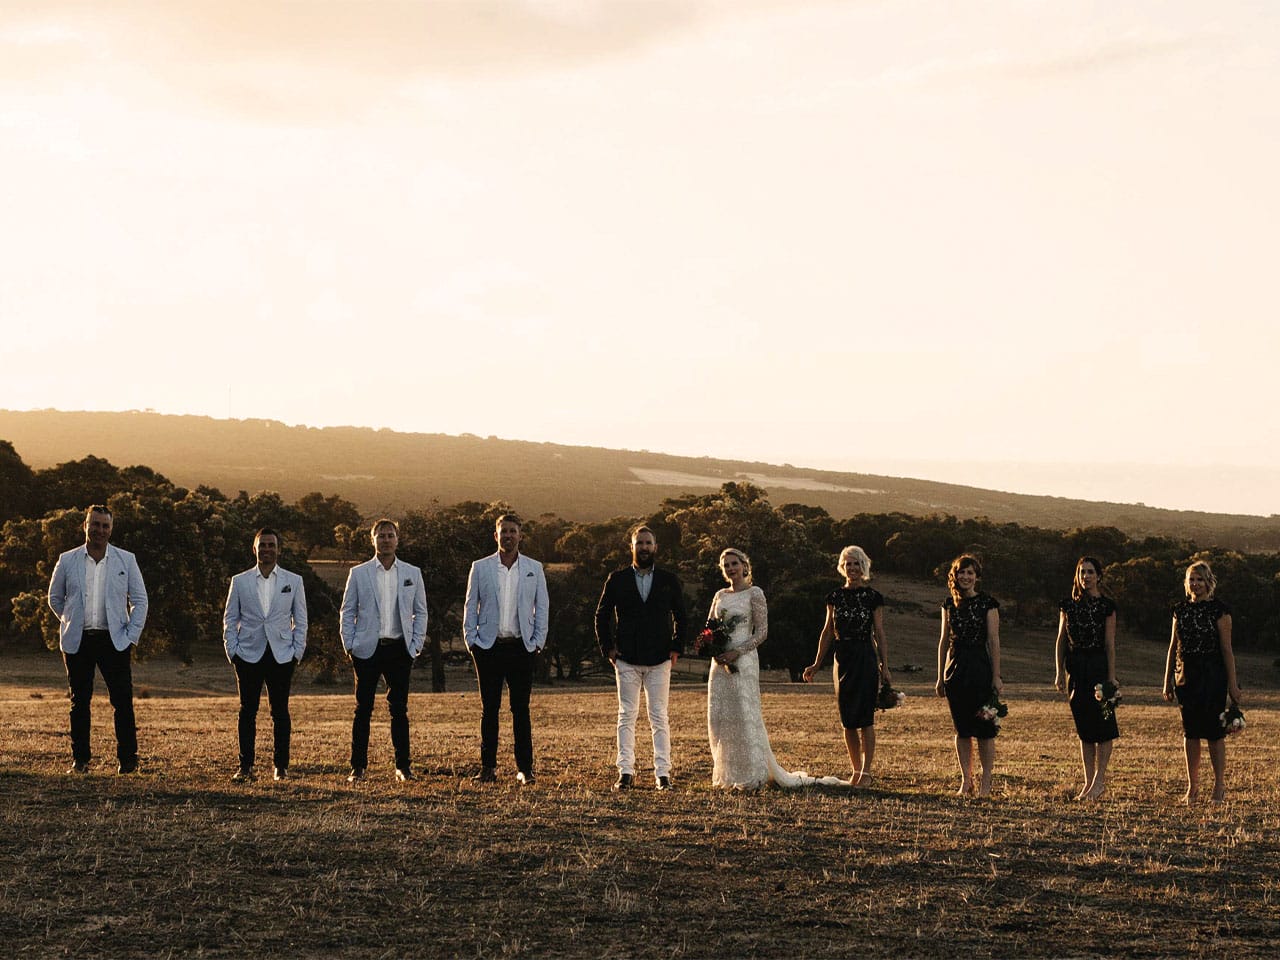 Bridal party at sunset on a hill